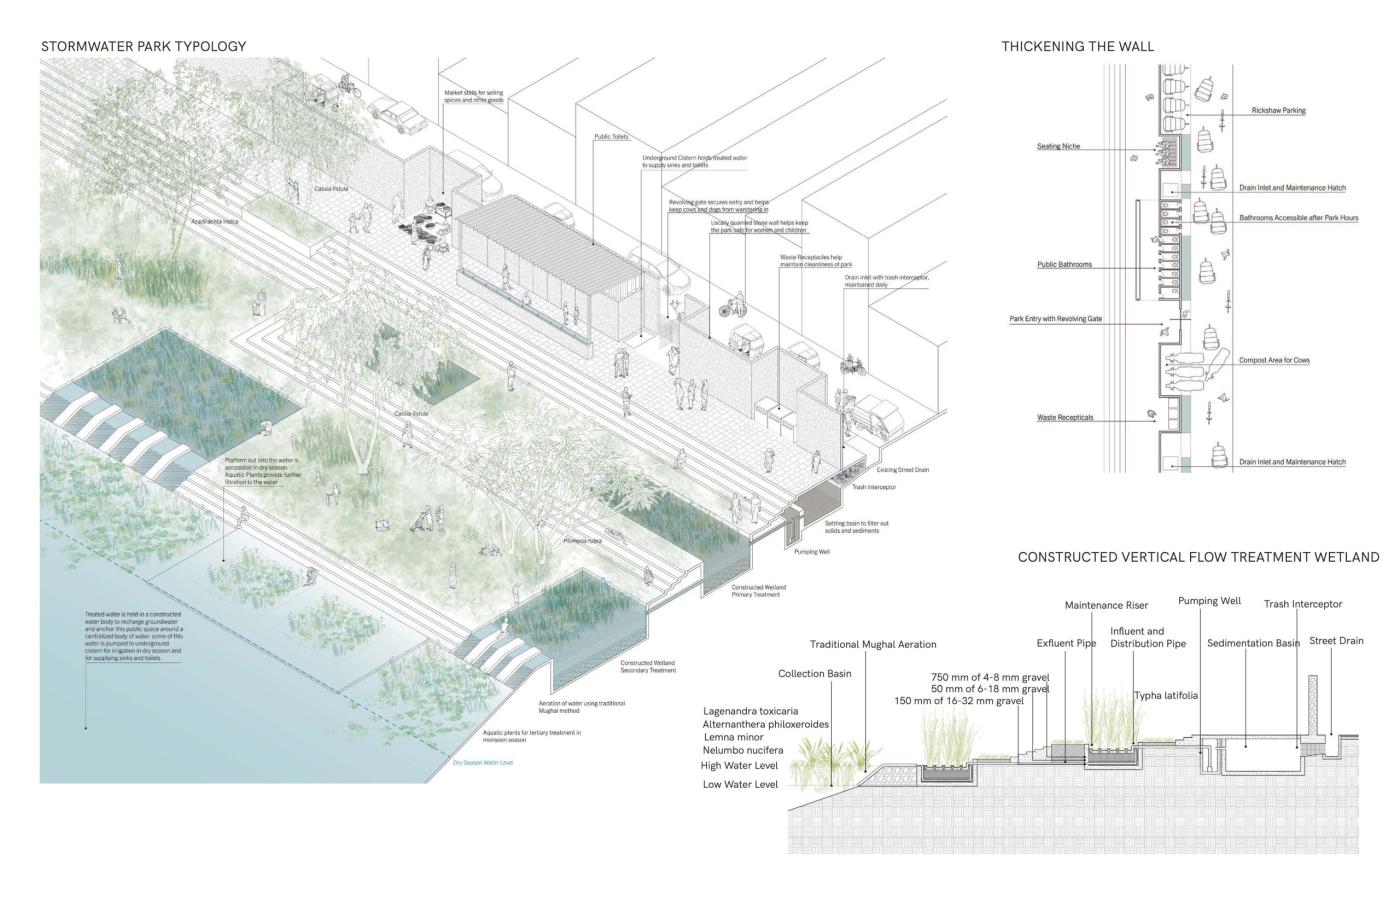 Yamuna River Project - Axon drawing of proposed Stormwater Park Typology